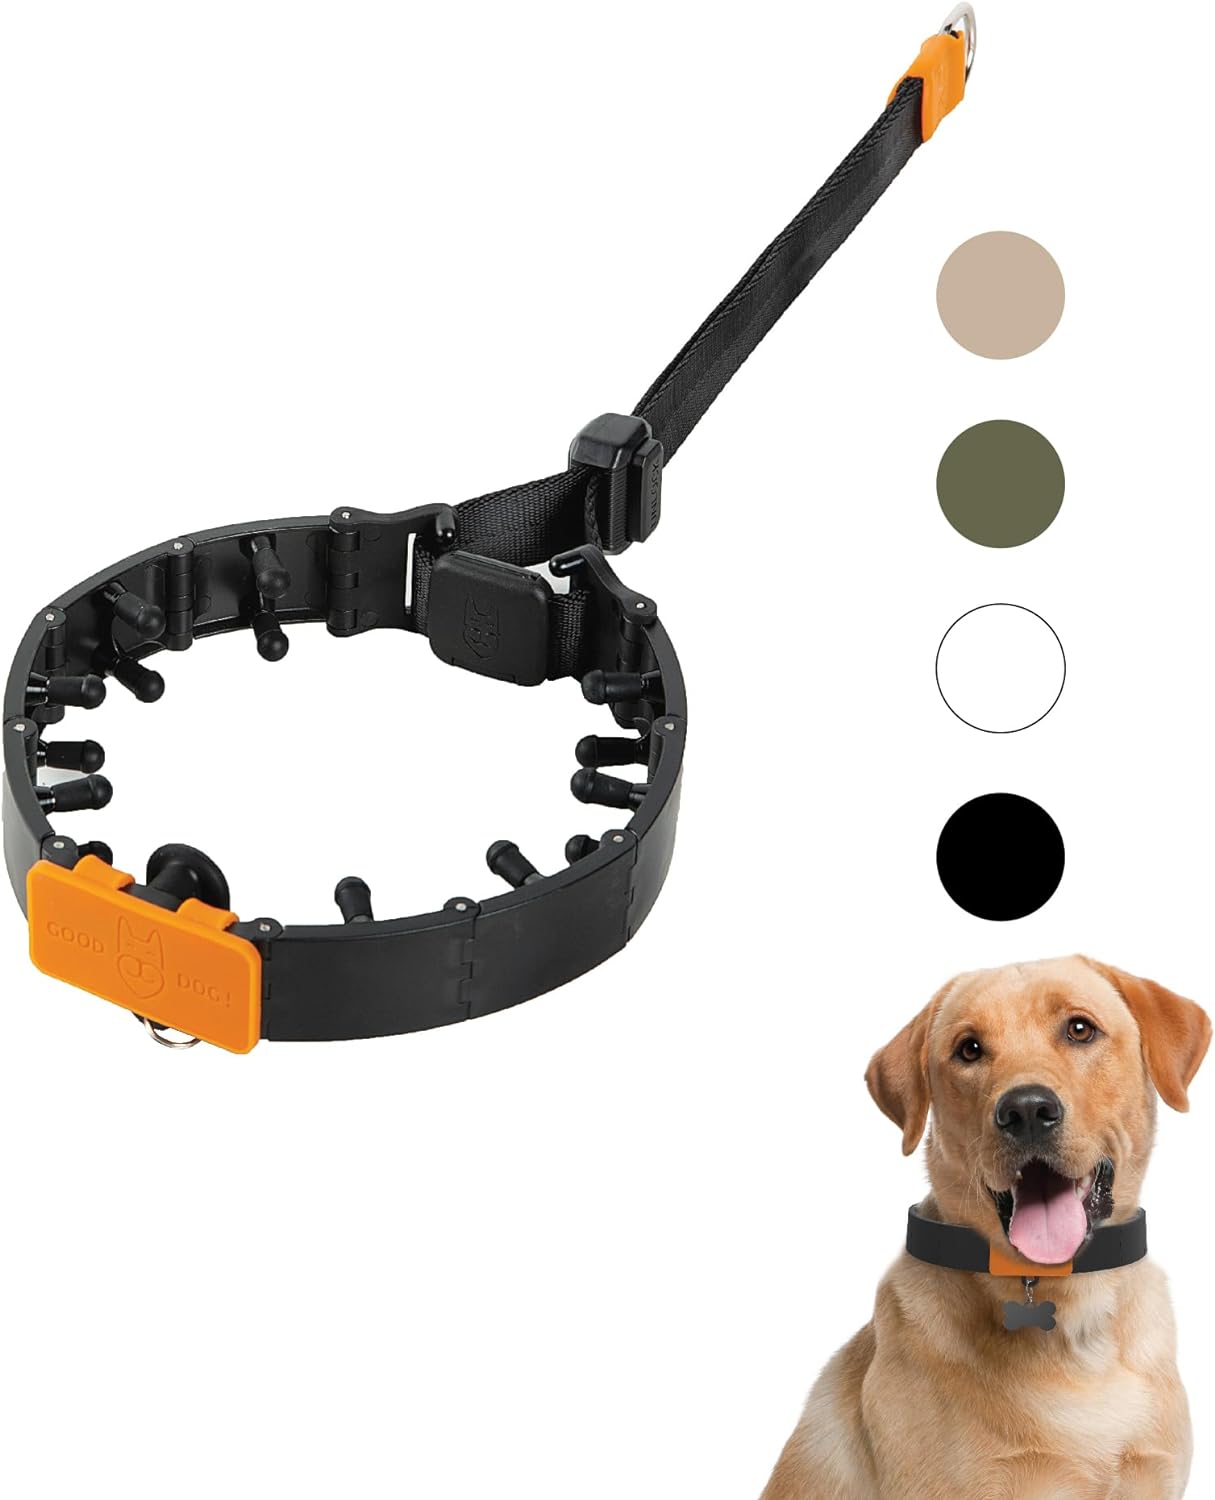 SVD.PET Dog Prong Collar for No-Pull Training, Quick-Release Buckle Adjustable Pinch Collar for Large Dogs (Black, Large Size)